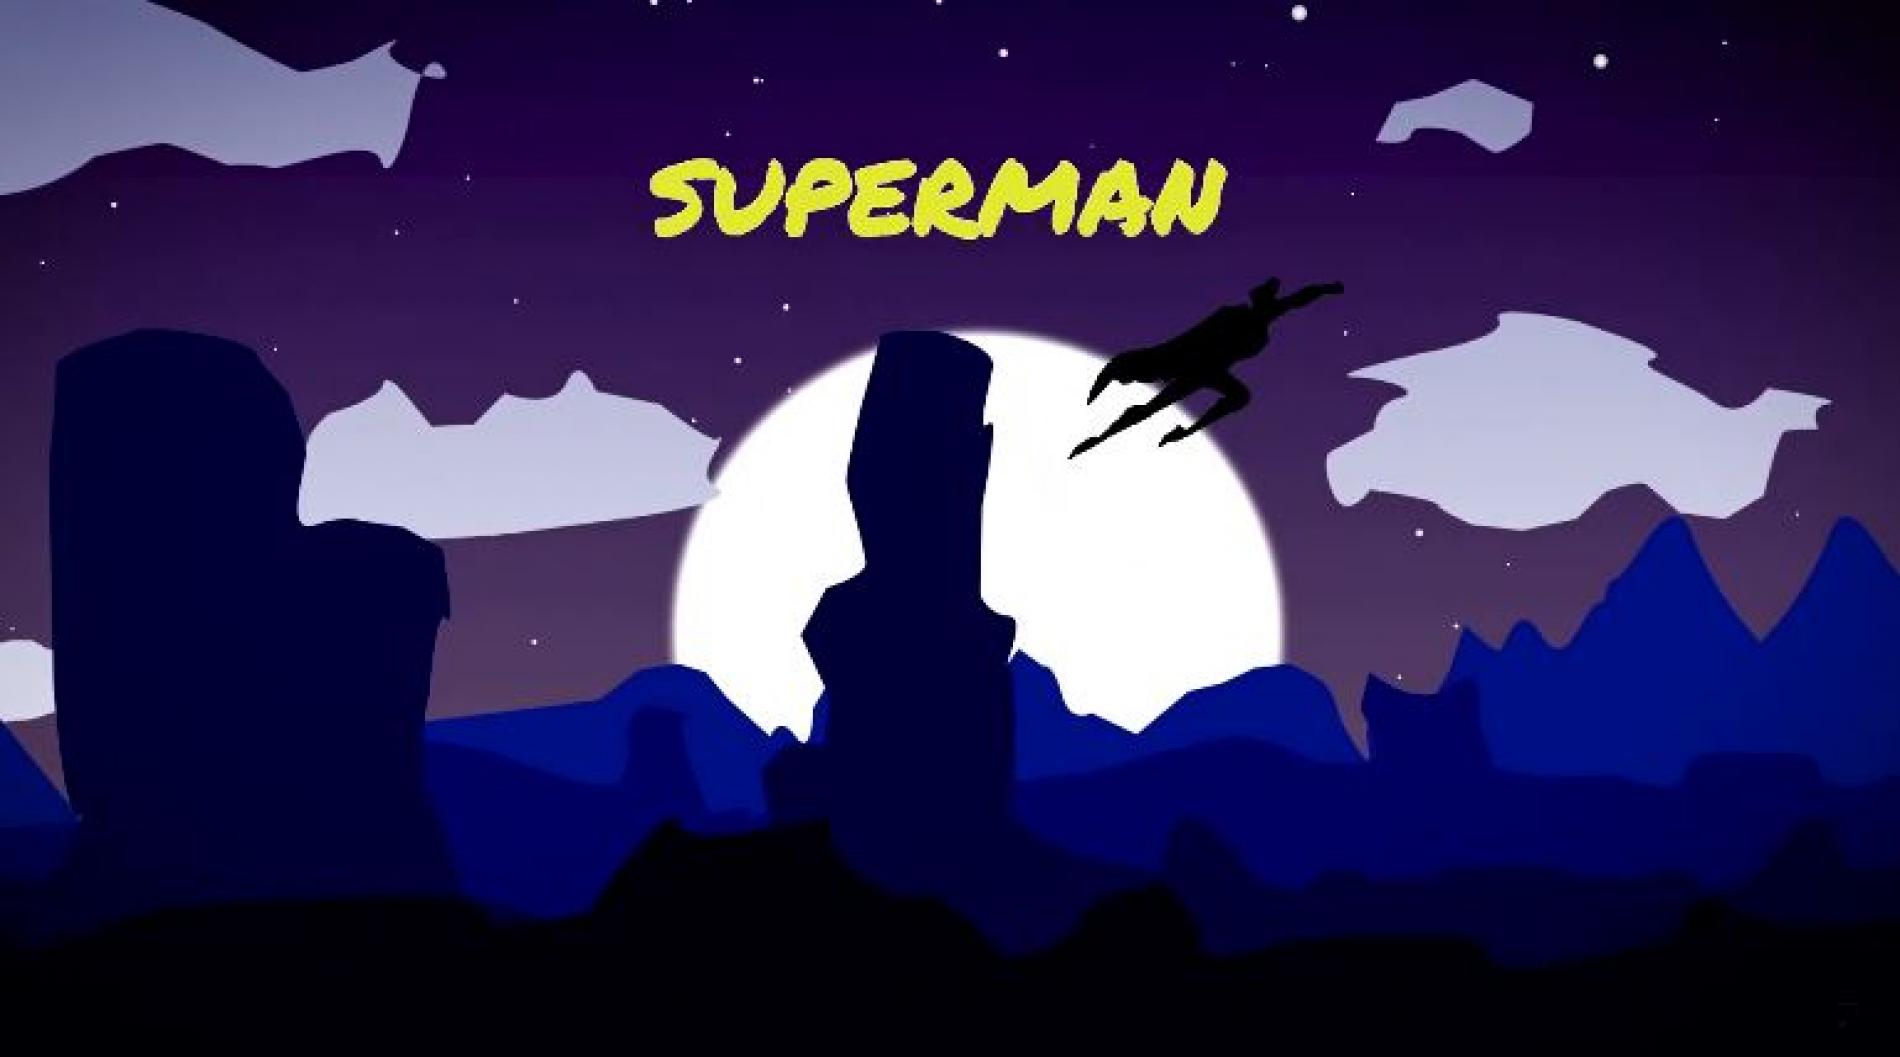 New Music : Madaid – Superman (feat Cozzy)